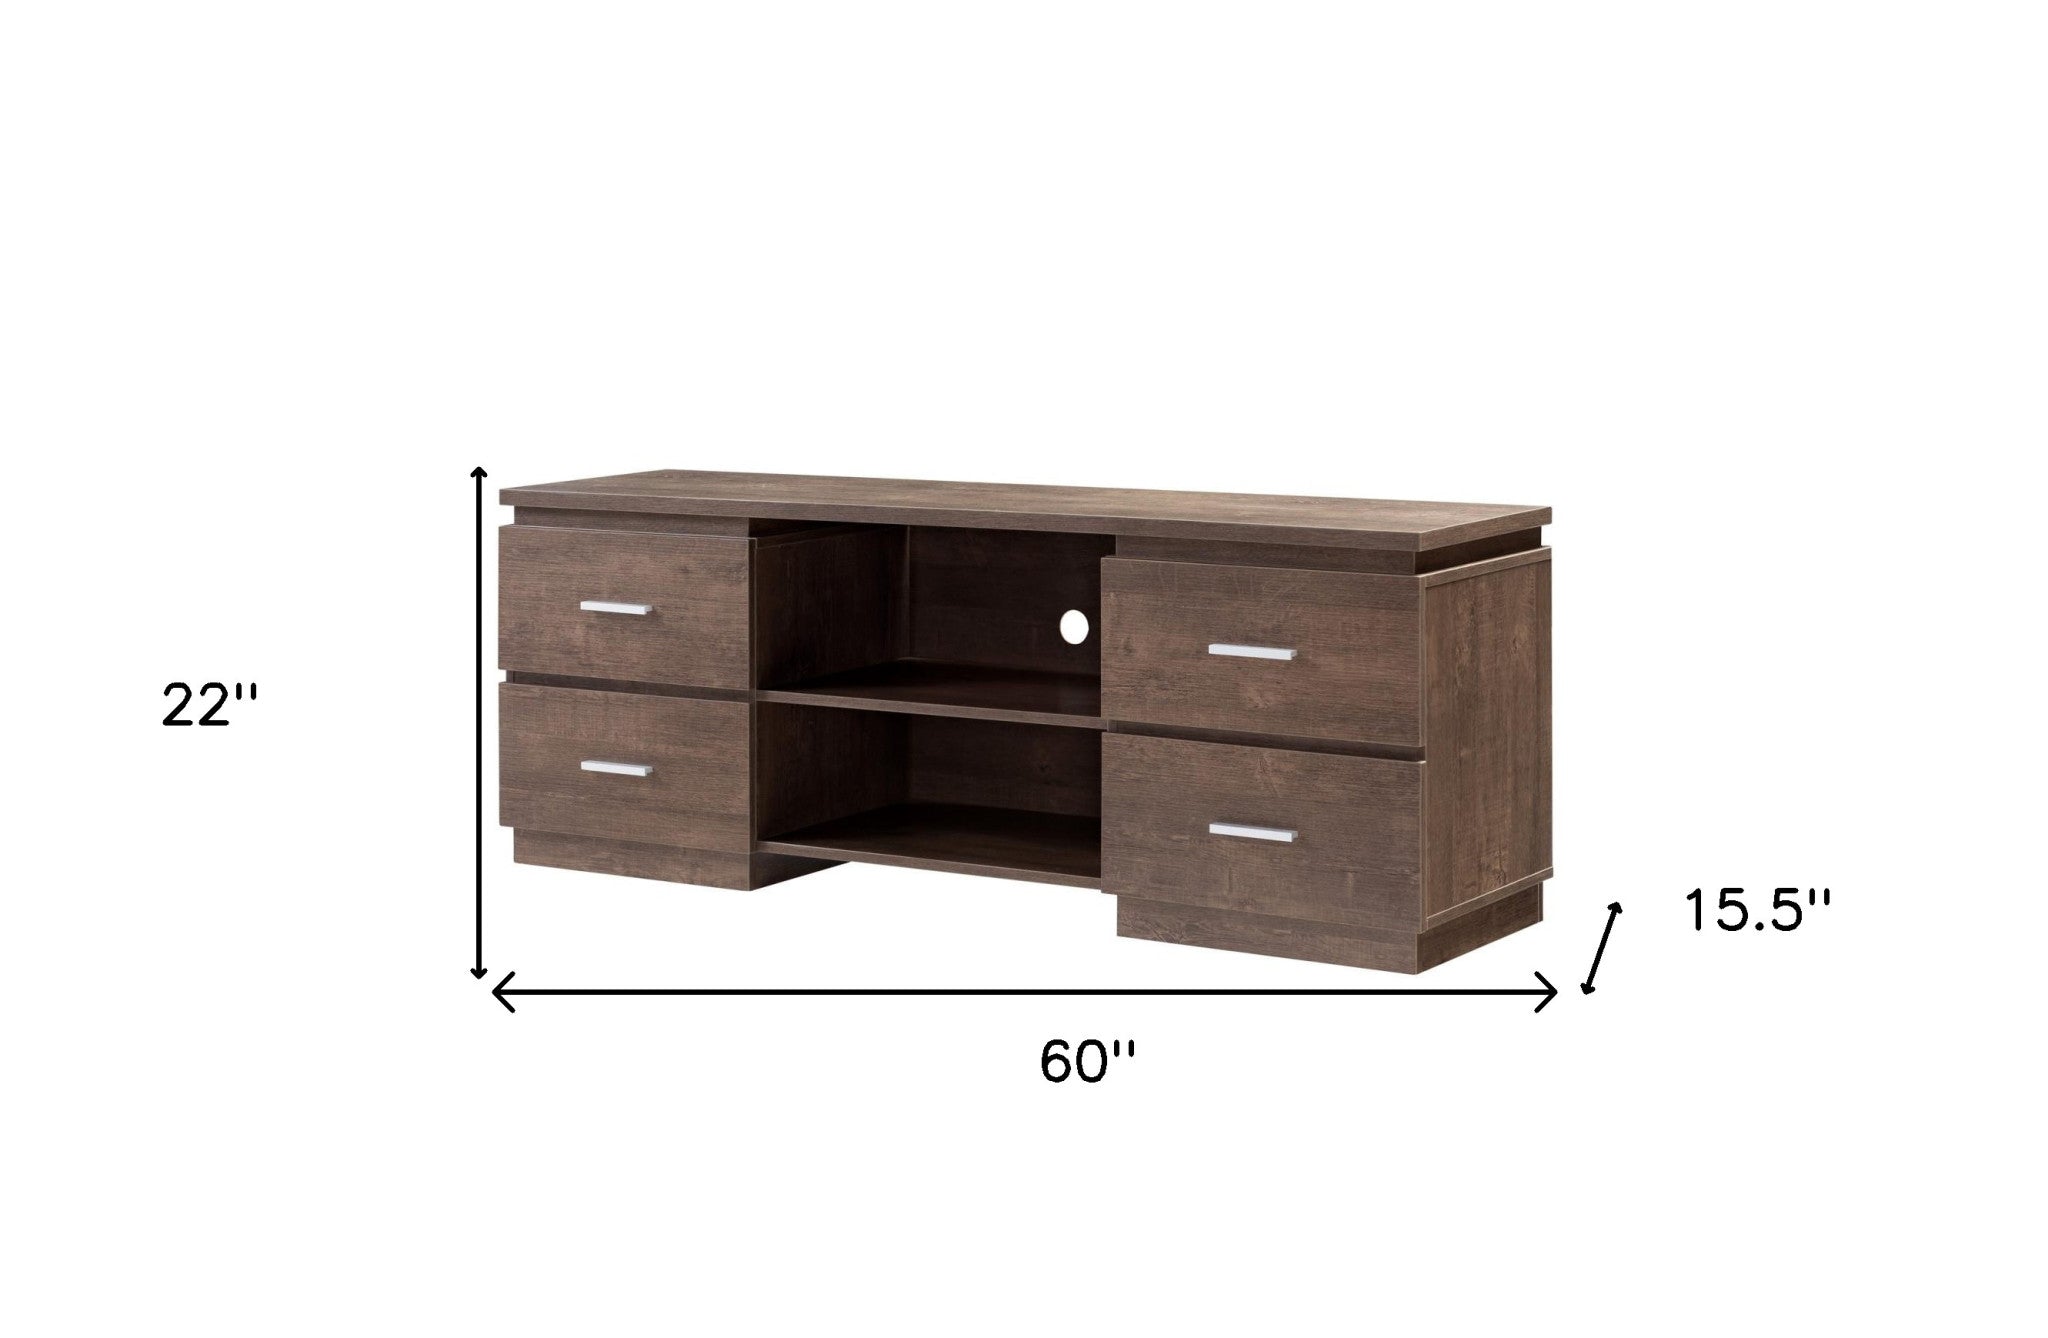 60" Brown Particle Board And Mdf Cabinet Enclosed Storage TV Stand